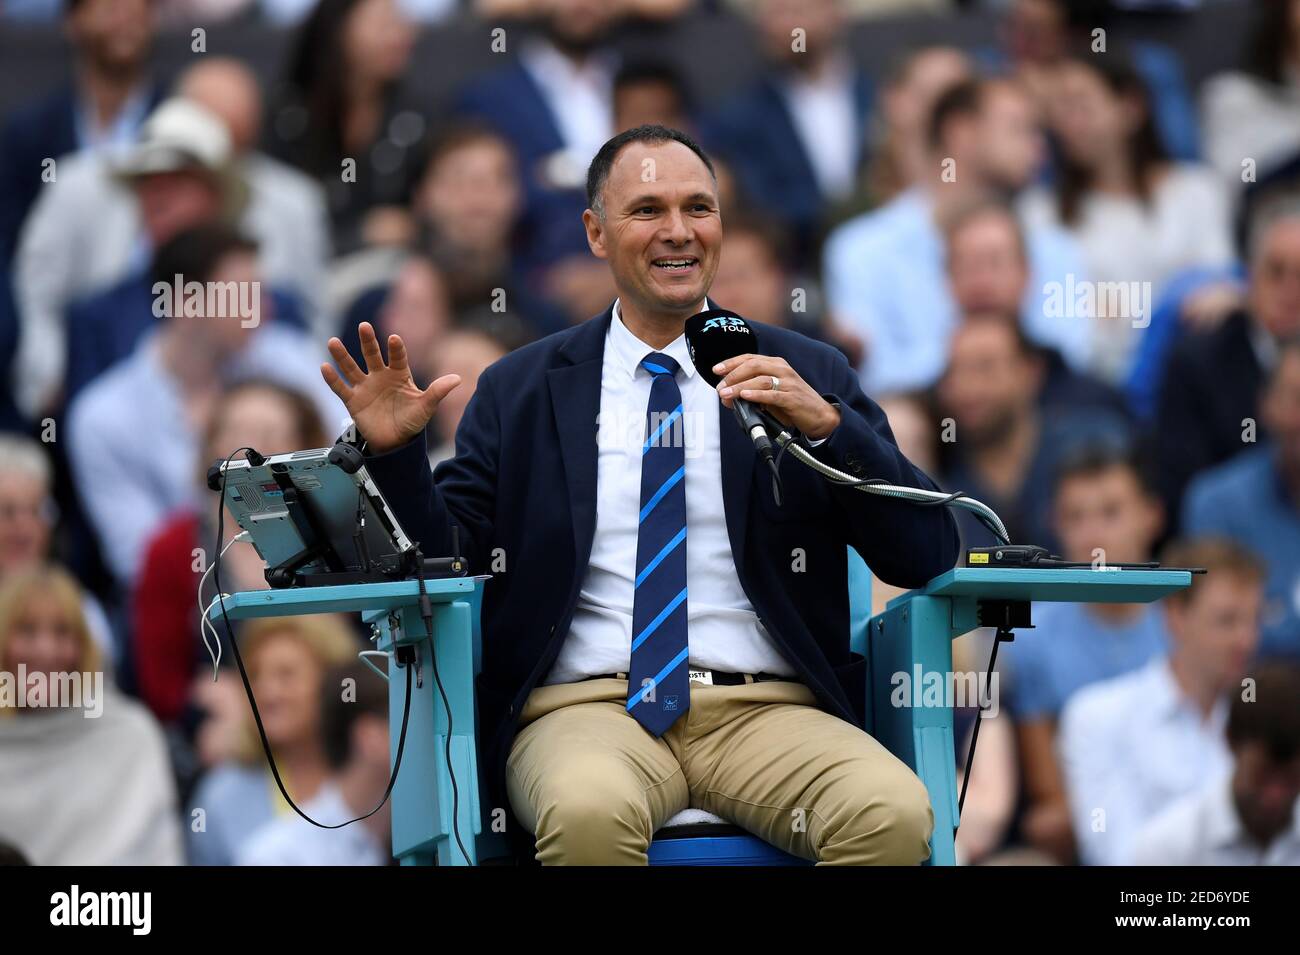 Tennis - ATP 500 - Fever-Tree Championships - The Queen's Club, London,  Britain - June 23, 2019 Chair umpire Mohamed Lahyani during the match  Action Images via Reuters/Tony O'Brien Stock Photo - Alamy